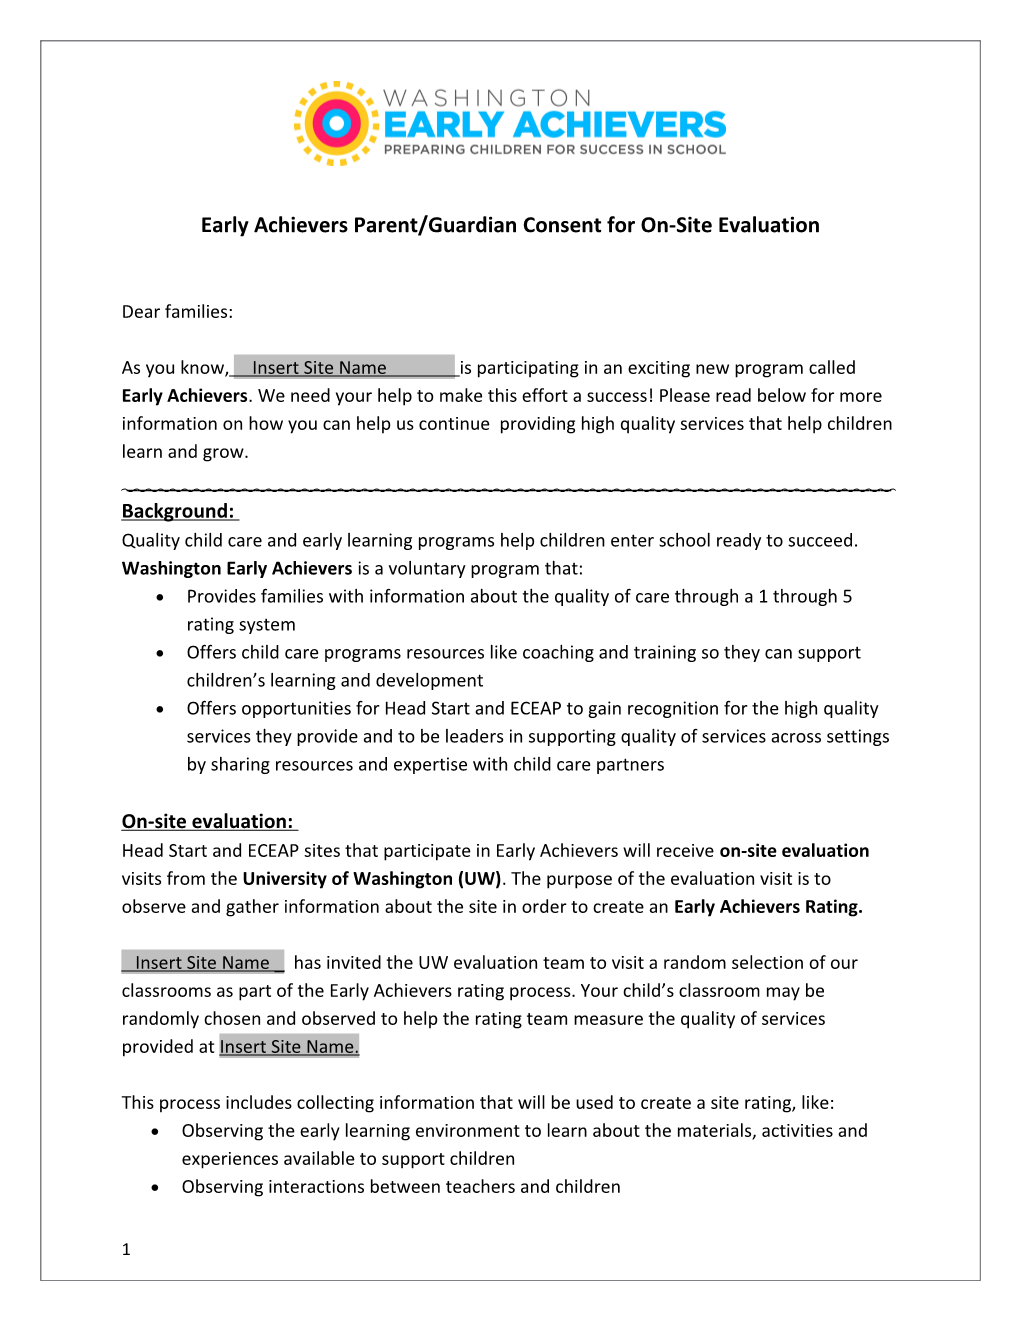 Early Achievers Parent/Guardian Consent for On-Site Evaluation